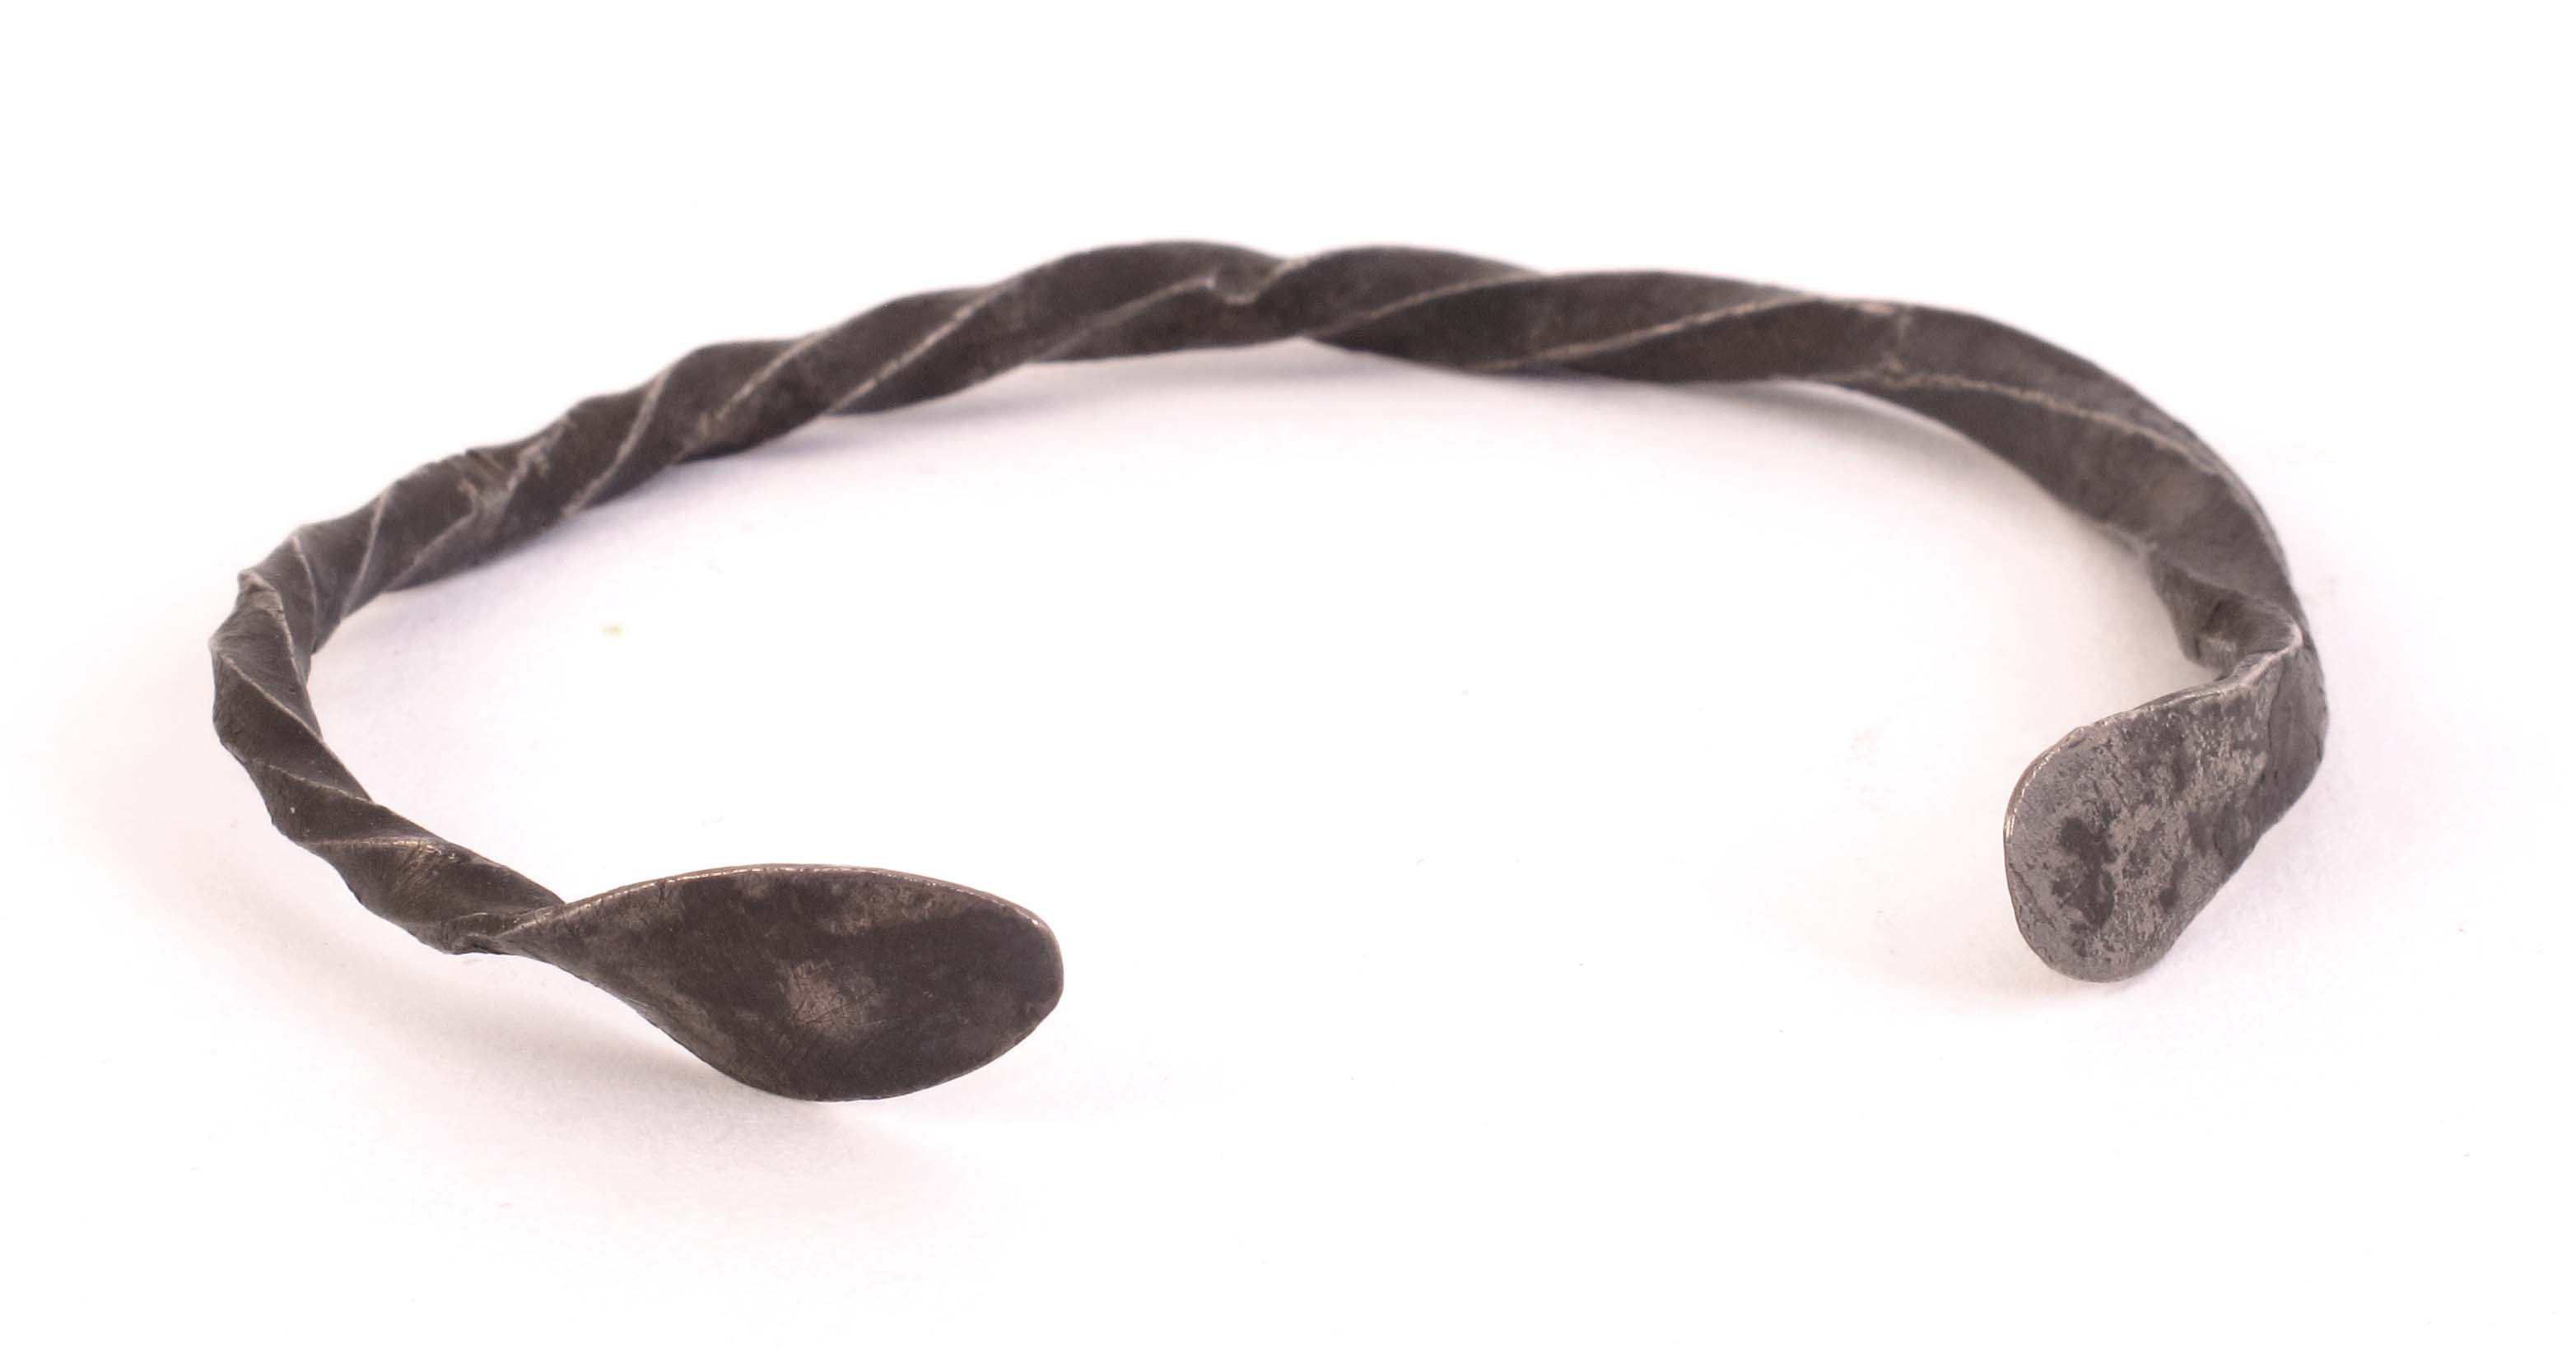 8th-9th century. Hiberno-Norse silver bracelet. The barley-twist band with spoon-shaped terminals.